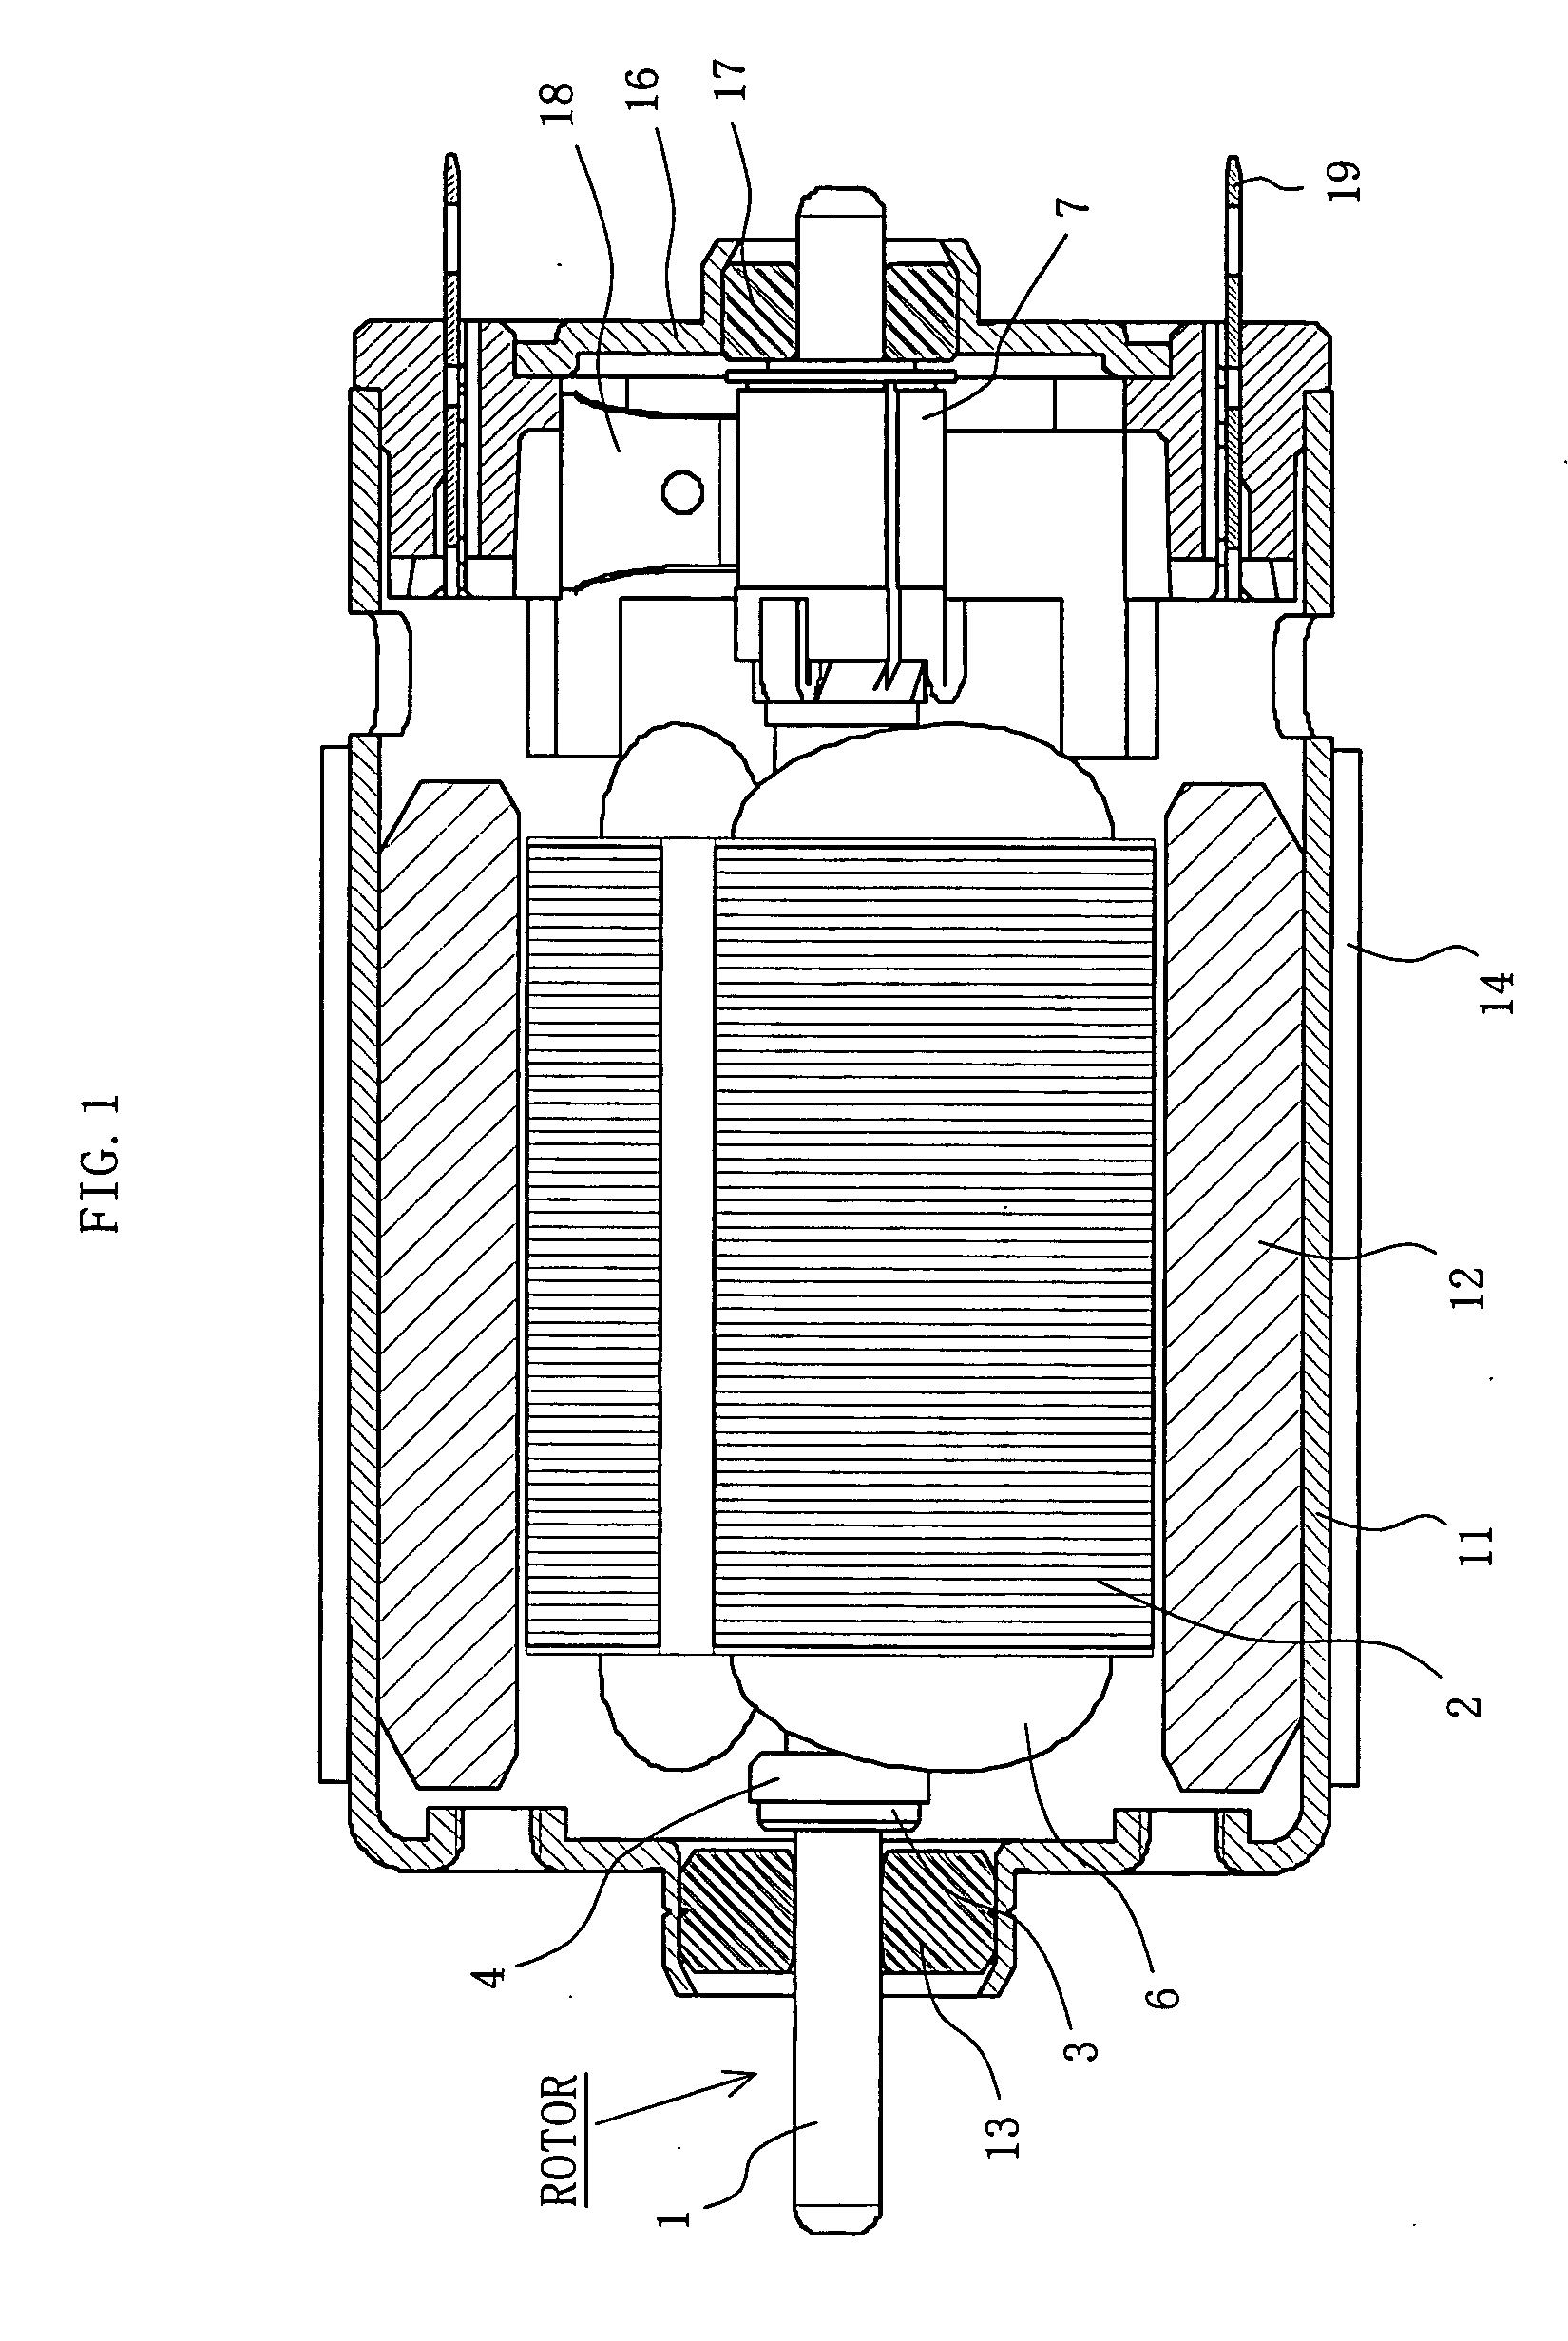 Rotor bush, motor equipped therewith, and manufacturing methods therefor